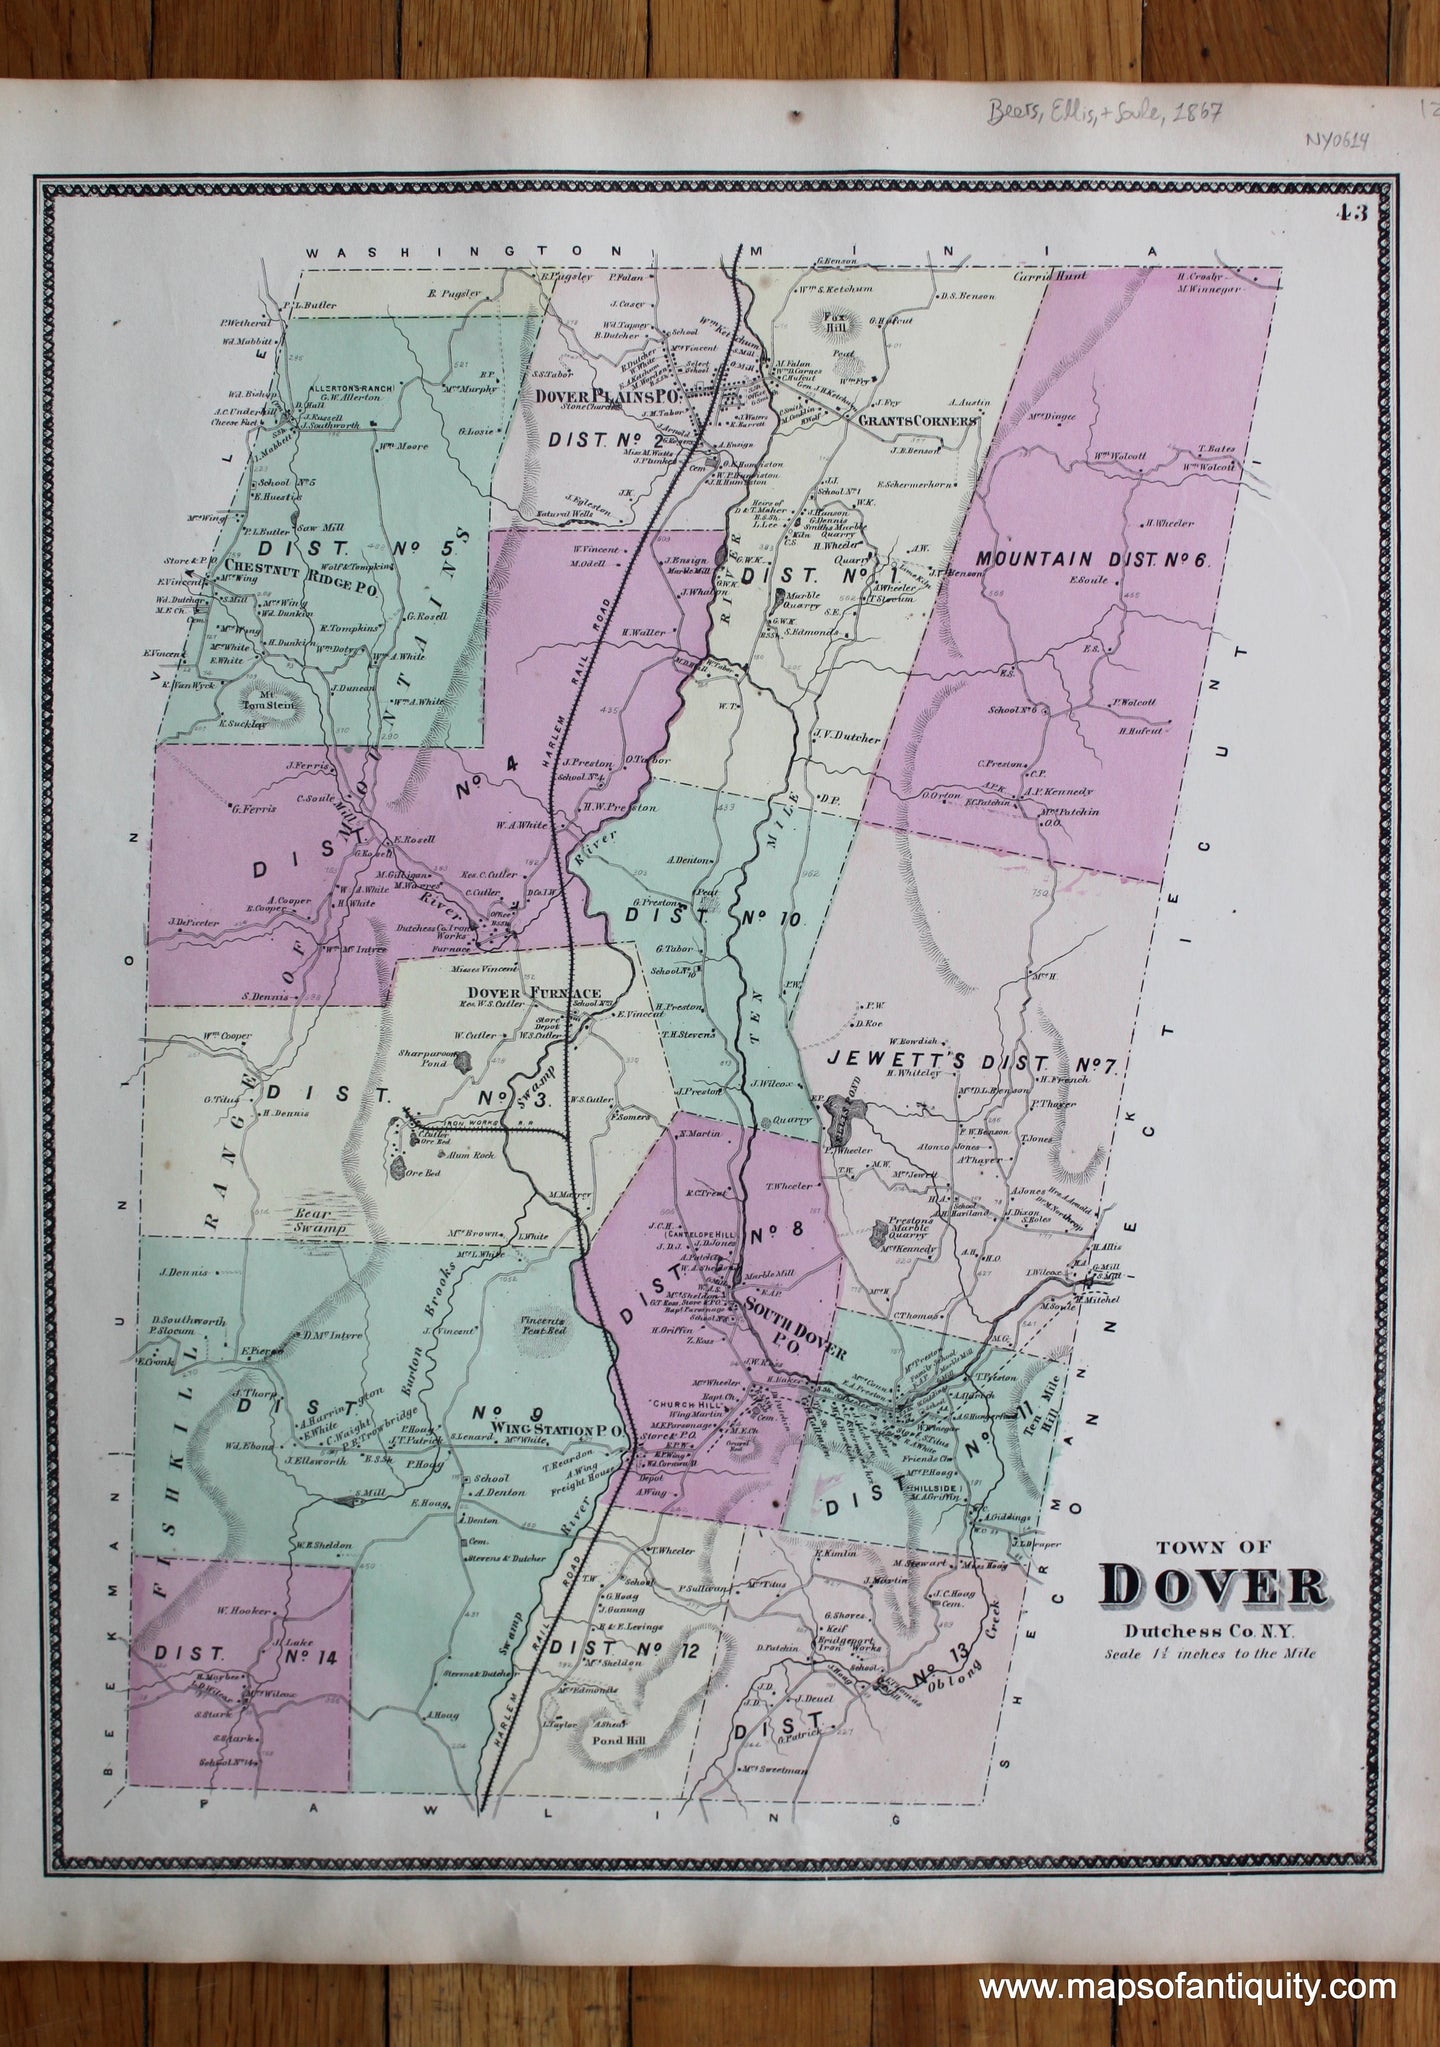 Antique-Hand-Colored-Map-Town-of-Dover-(NY)-United-States-New-York-1867-Beers-Ellis-and-Soule-Maps-Of-Antiquity